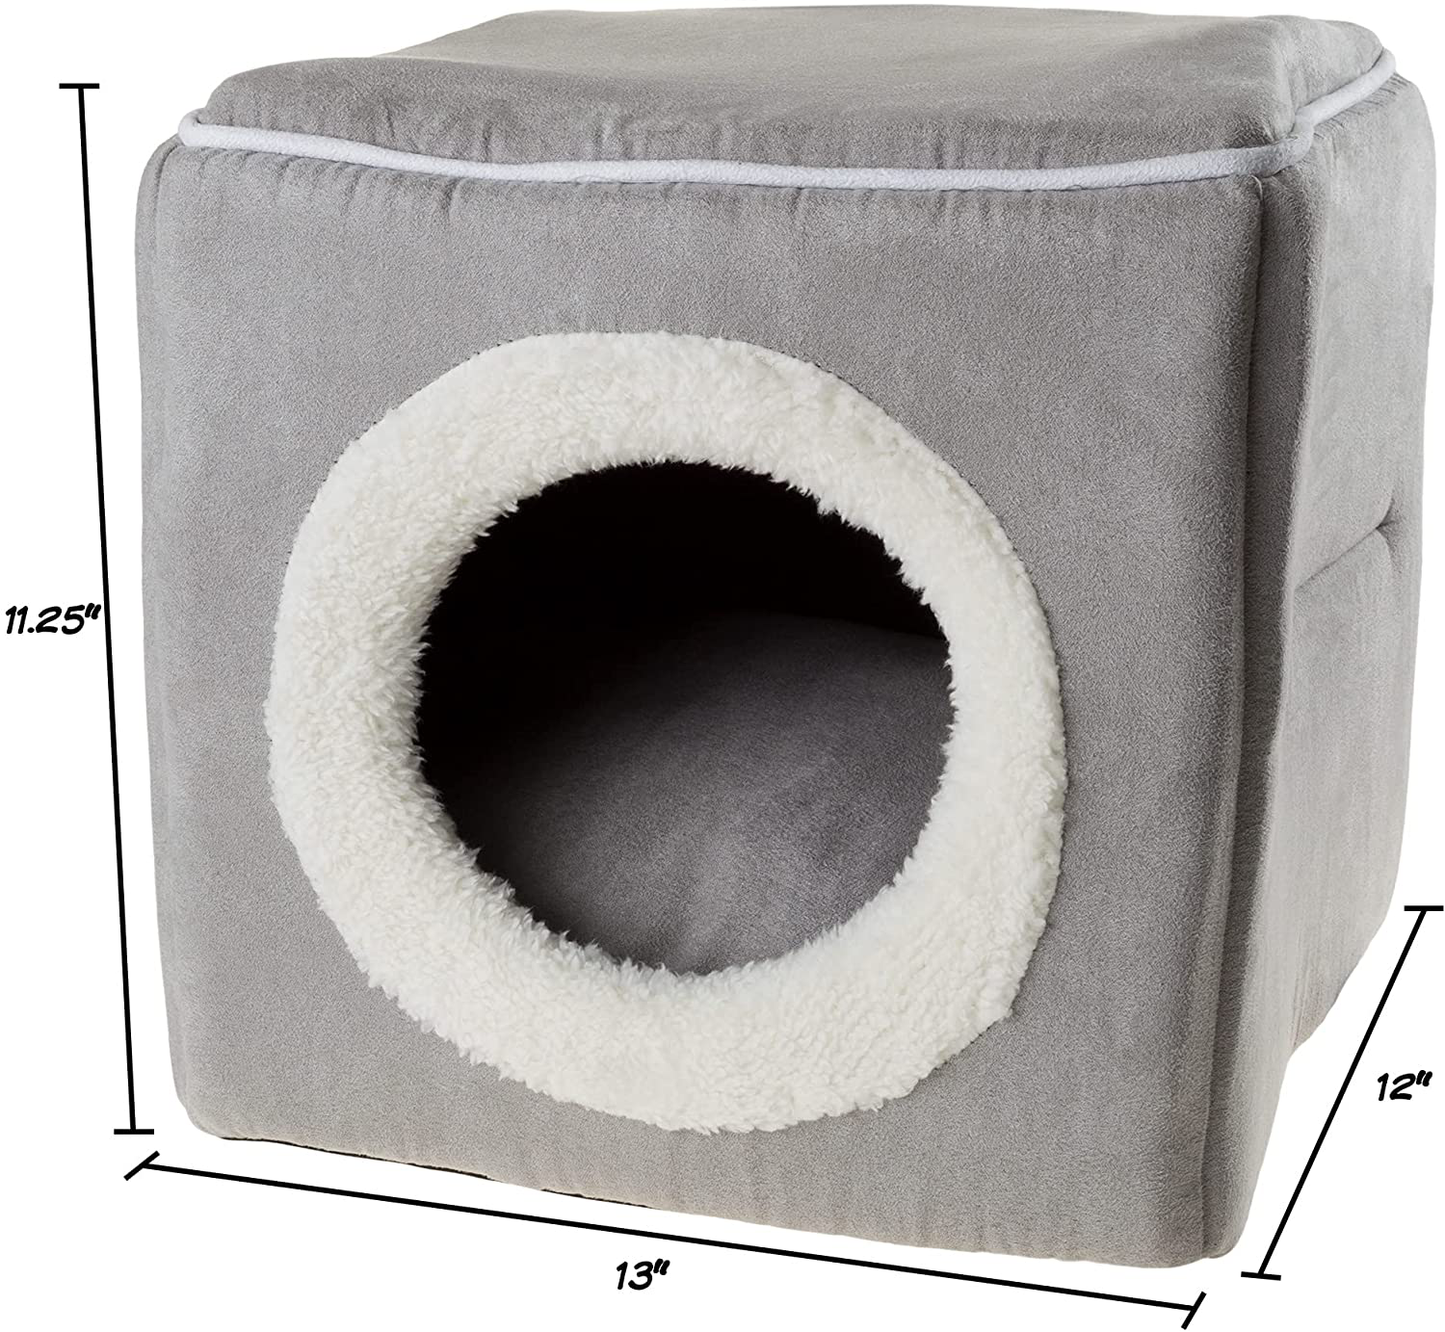 PETMAKER Cave Pet Bed Collection - Soft Indoor Enclosed Covered Cavern/House for Cats, Kittens, and Small Pets with Removable Cushion Pad